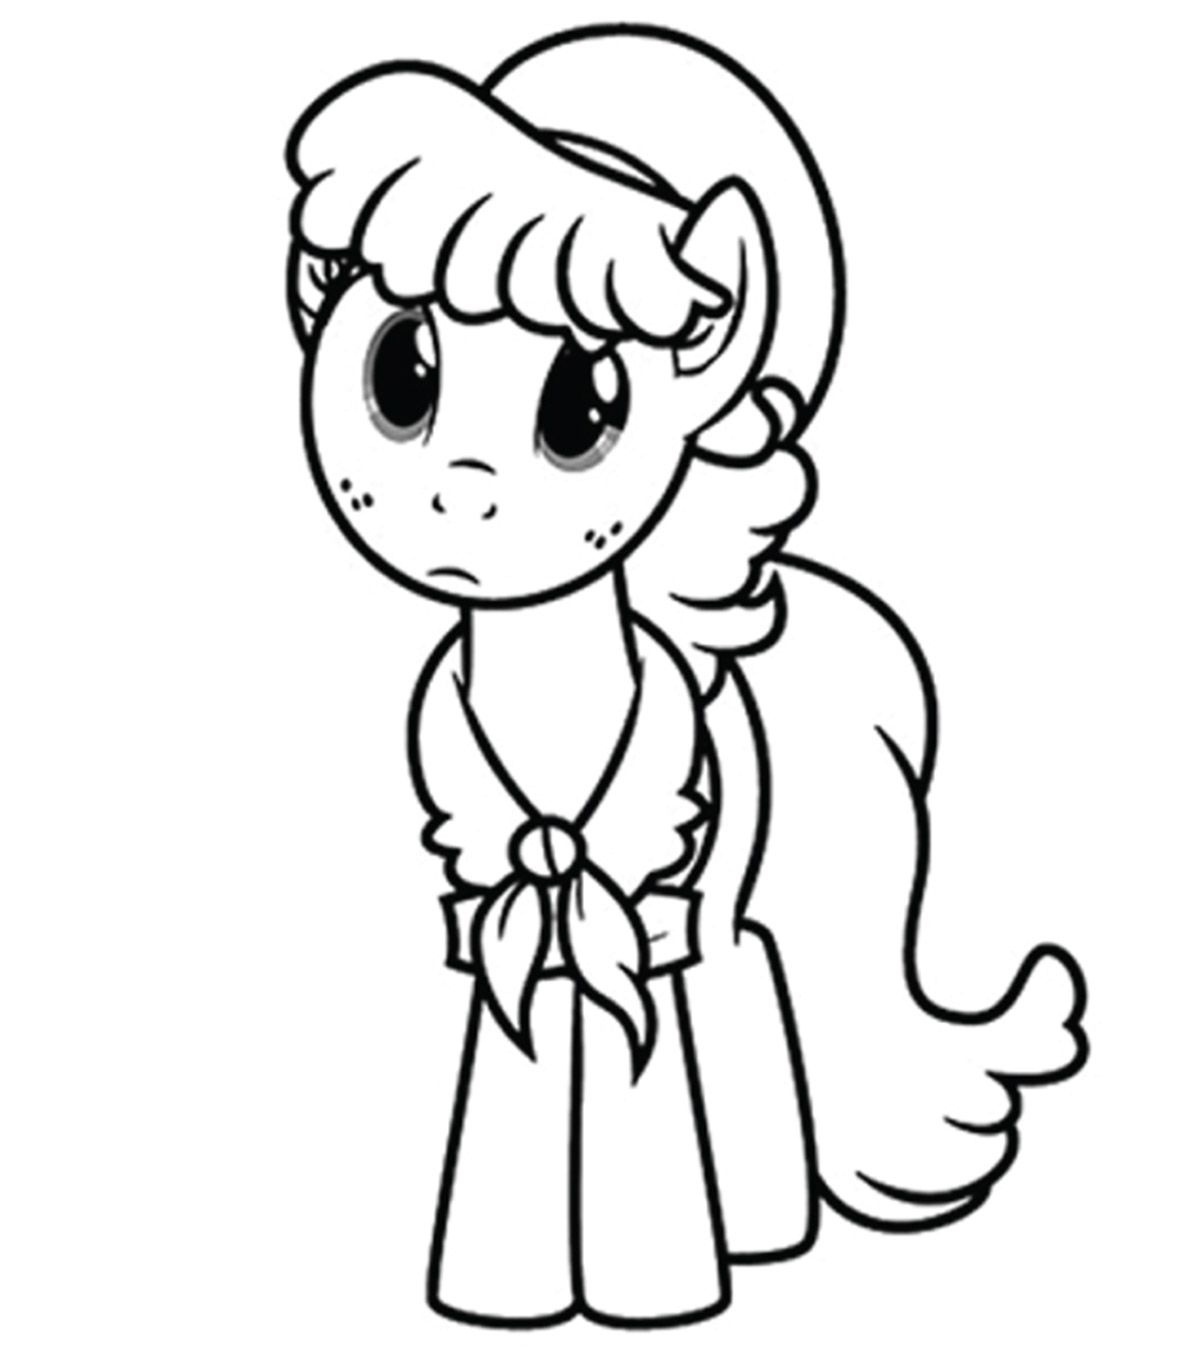 Ponys Coloring Pages - Coloring Home